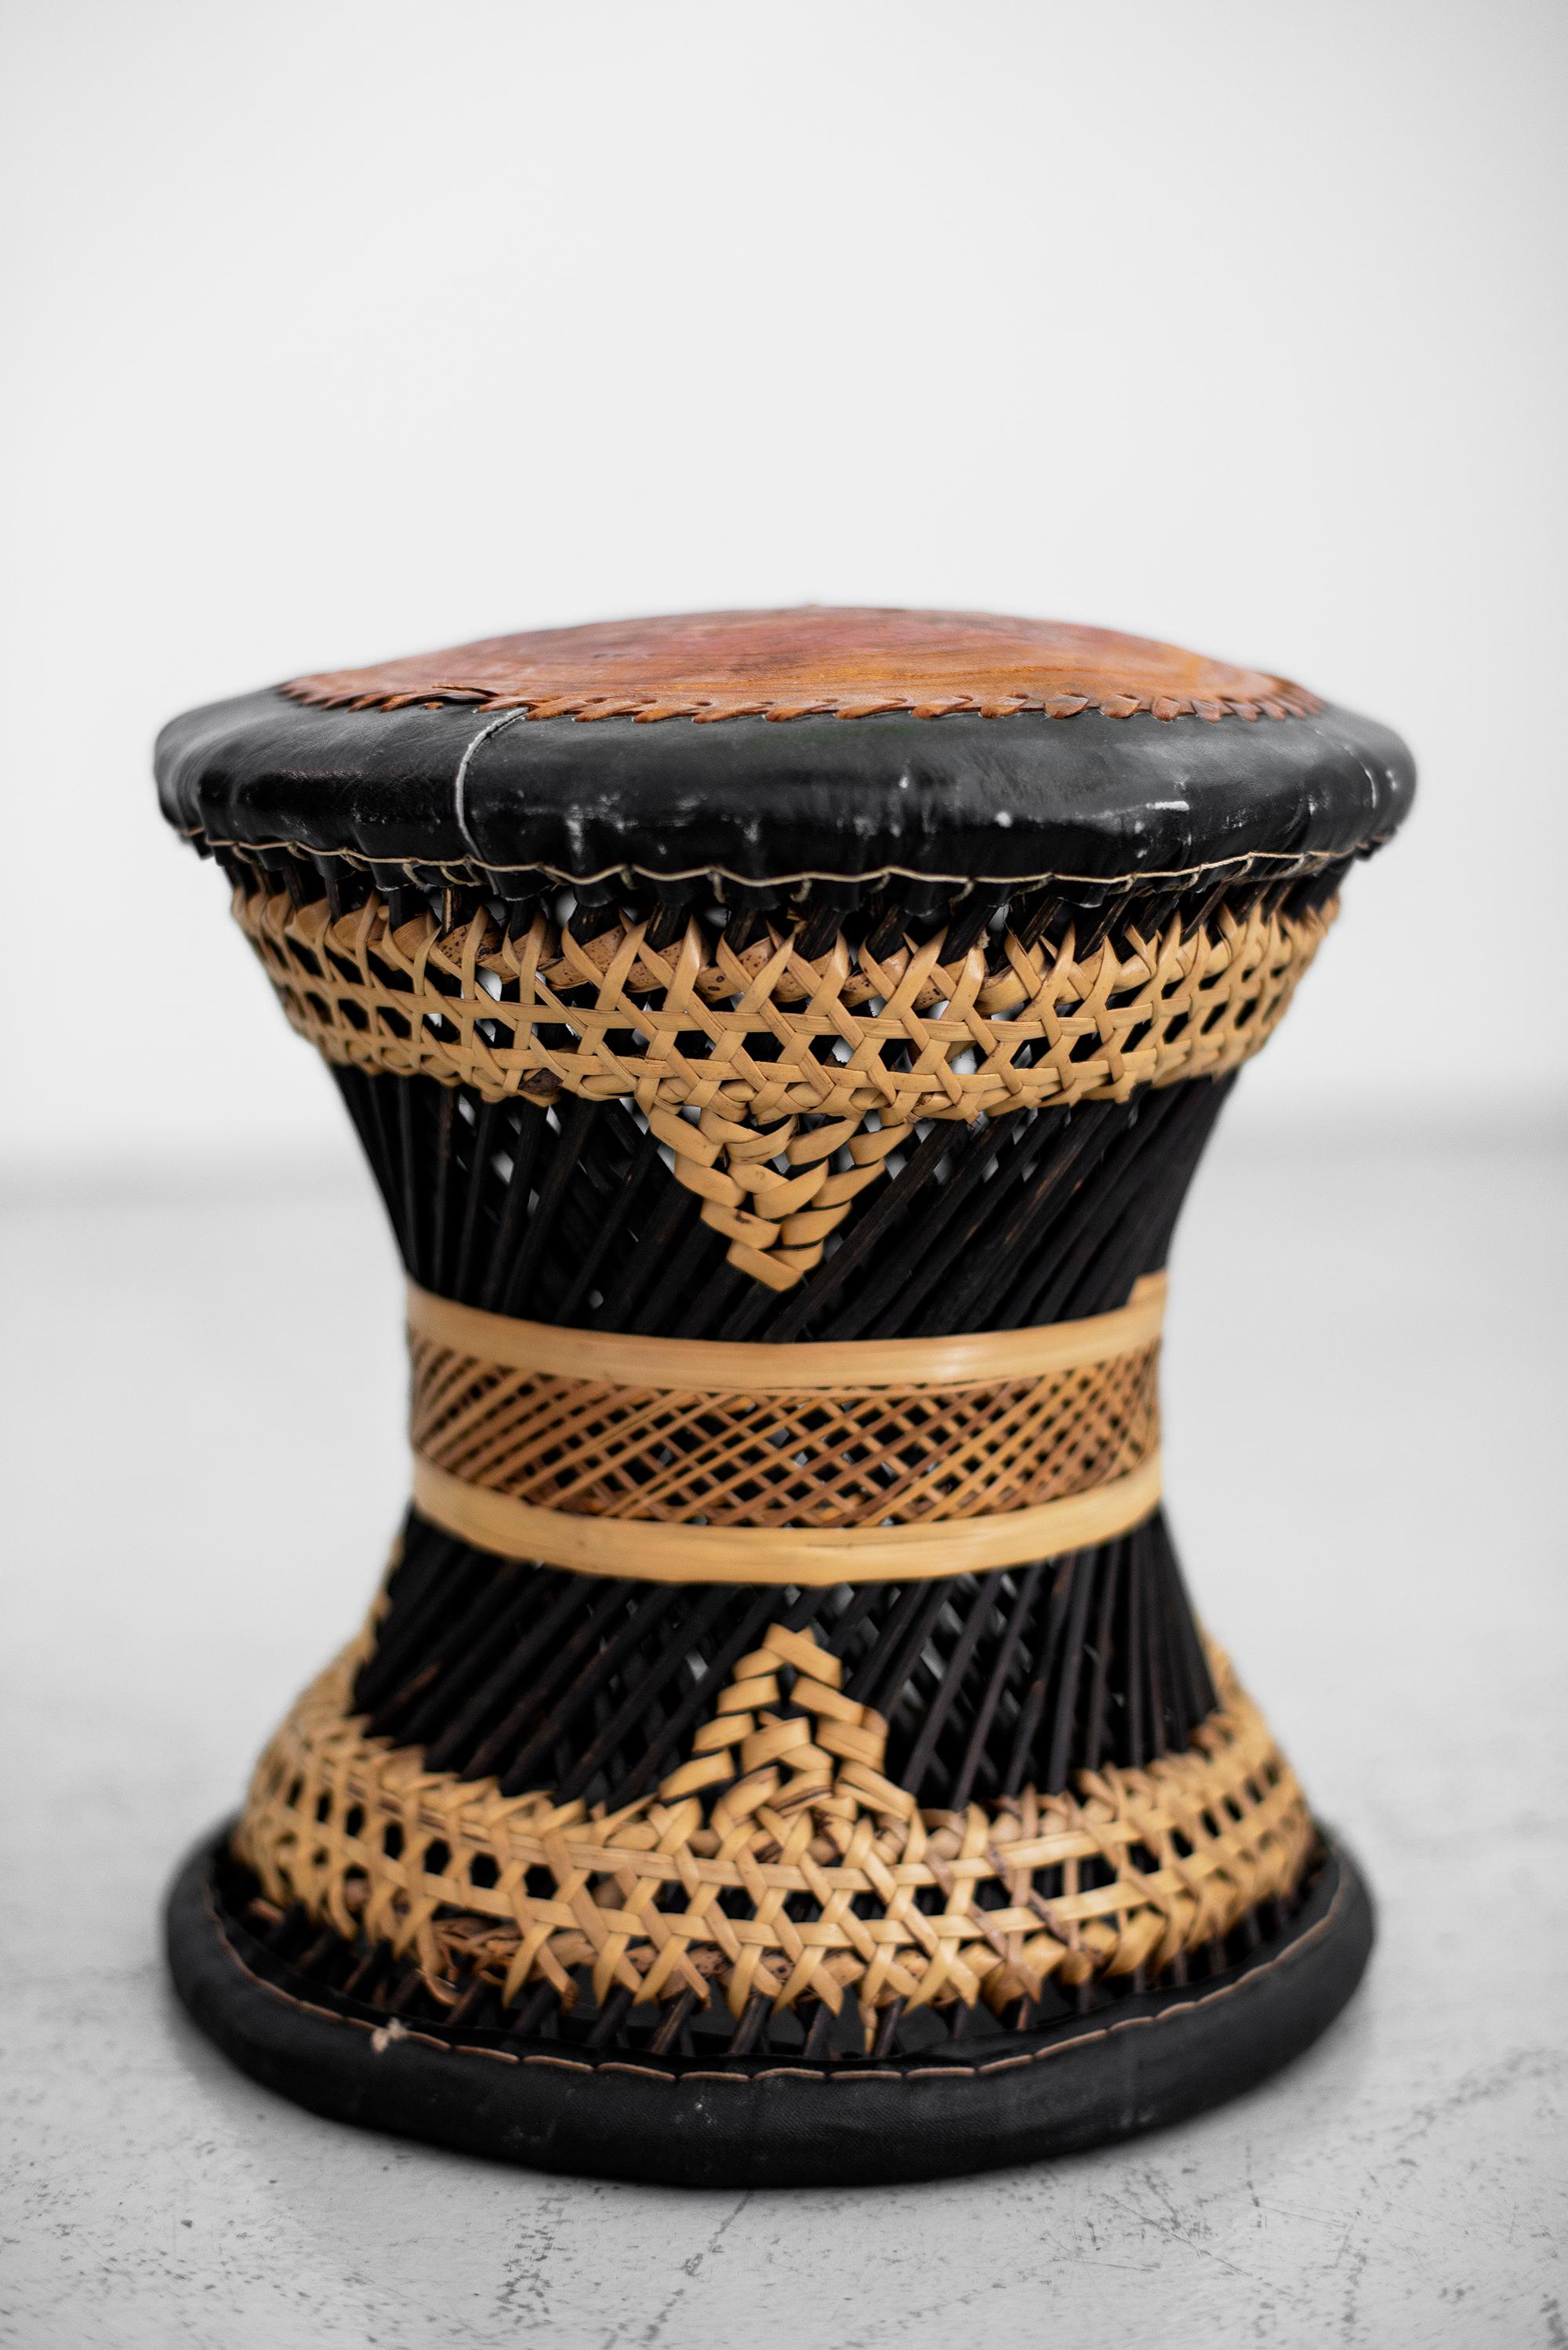 Ethnic woven rattan, wicker and leather stool
Fantastic patina and design.
Only single available.